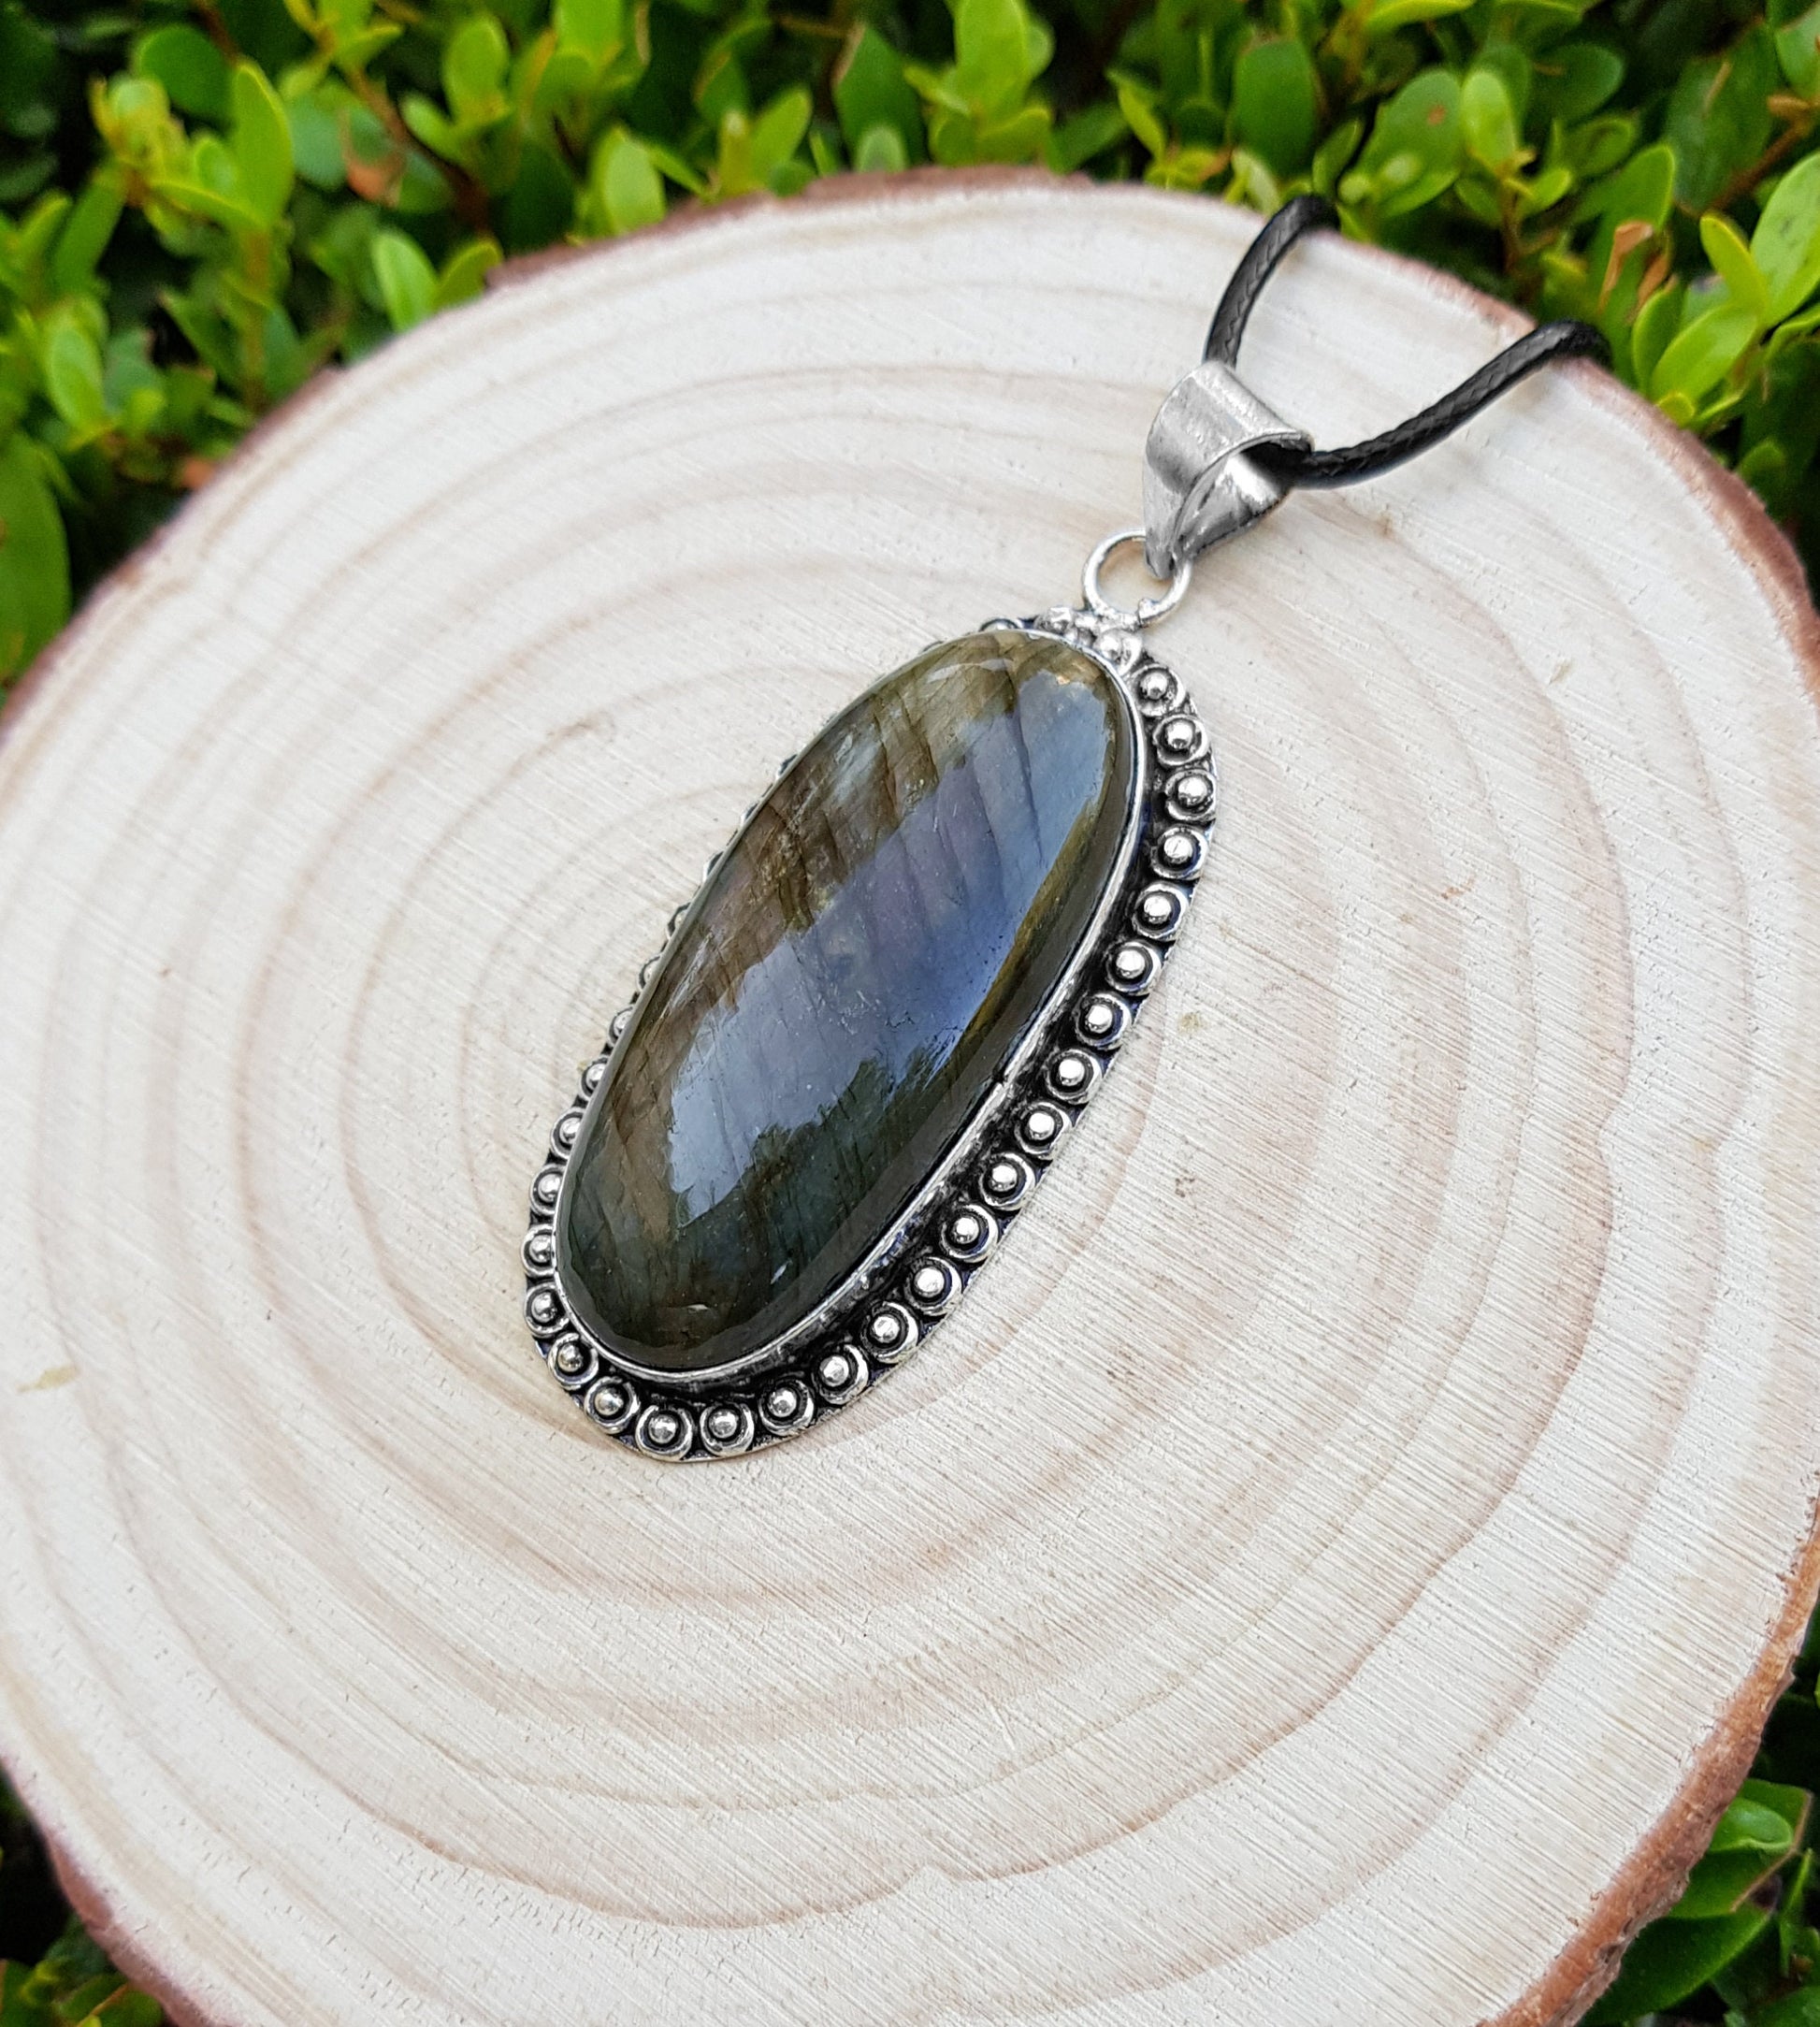 Big Labradorite Pendant In Sterling Silver Statement Necklace Boho Pendant One Of A Kind Gift